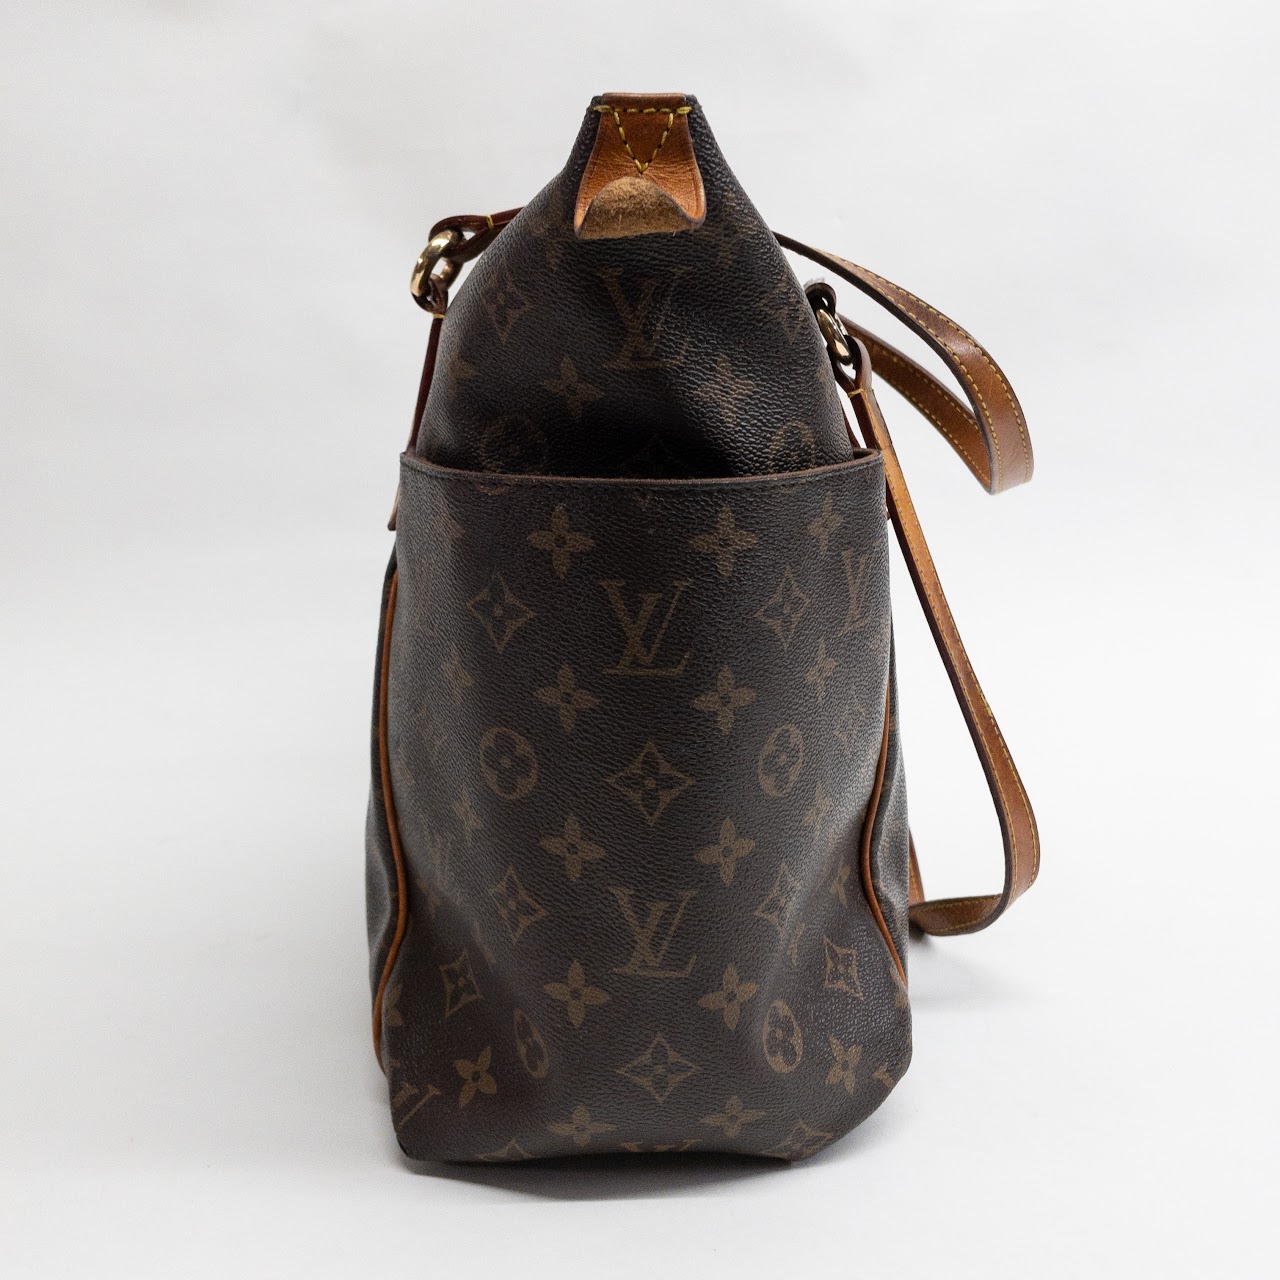 Sold at Auction: Louis Vuitton, NEW LOUIS VUITTON TOTALLY MM